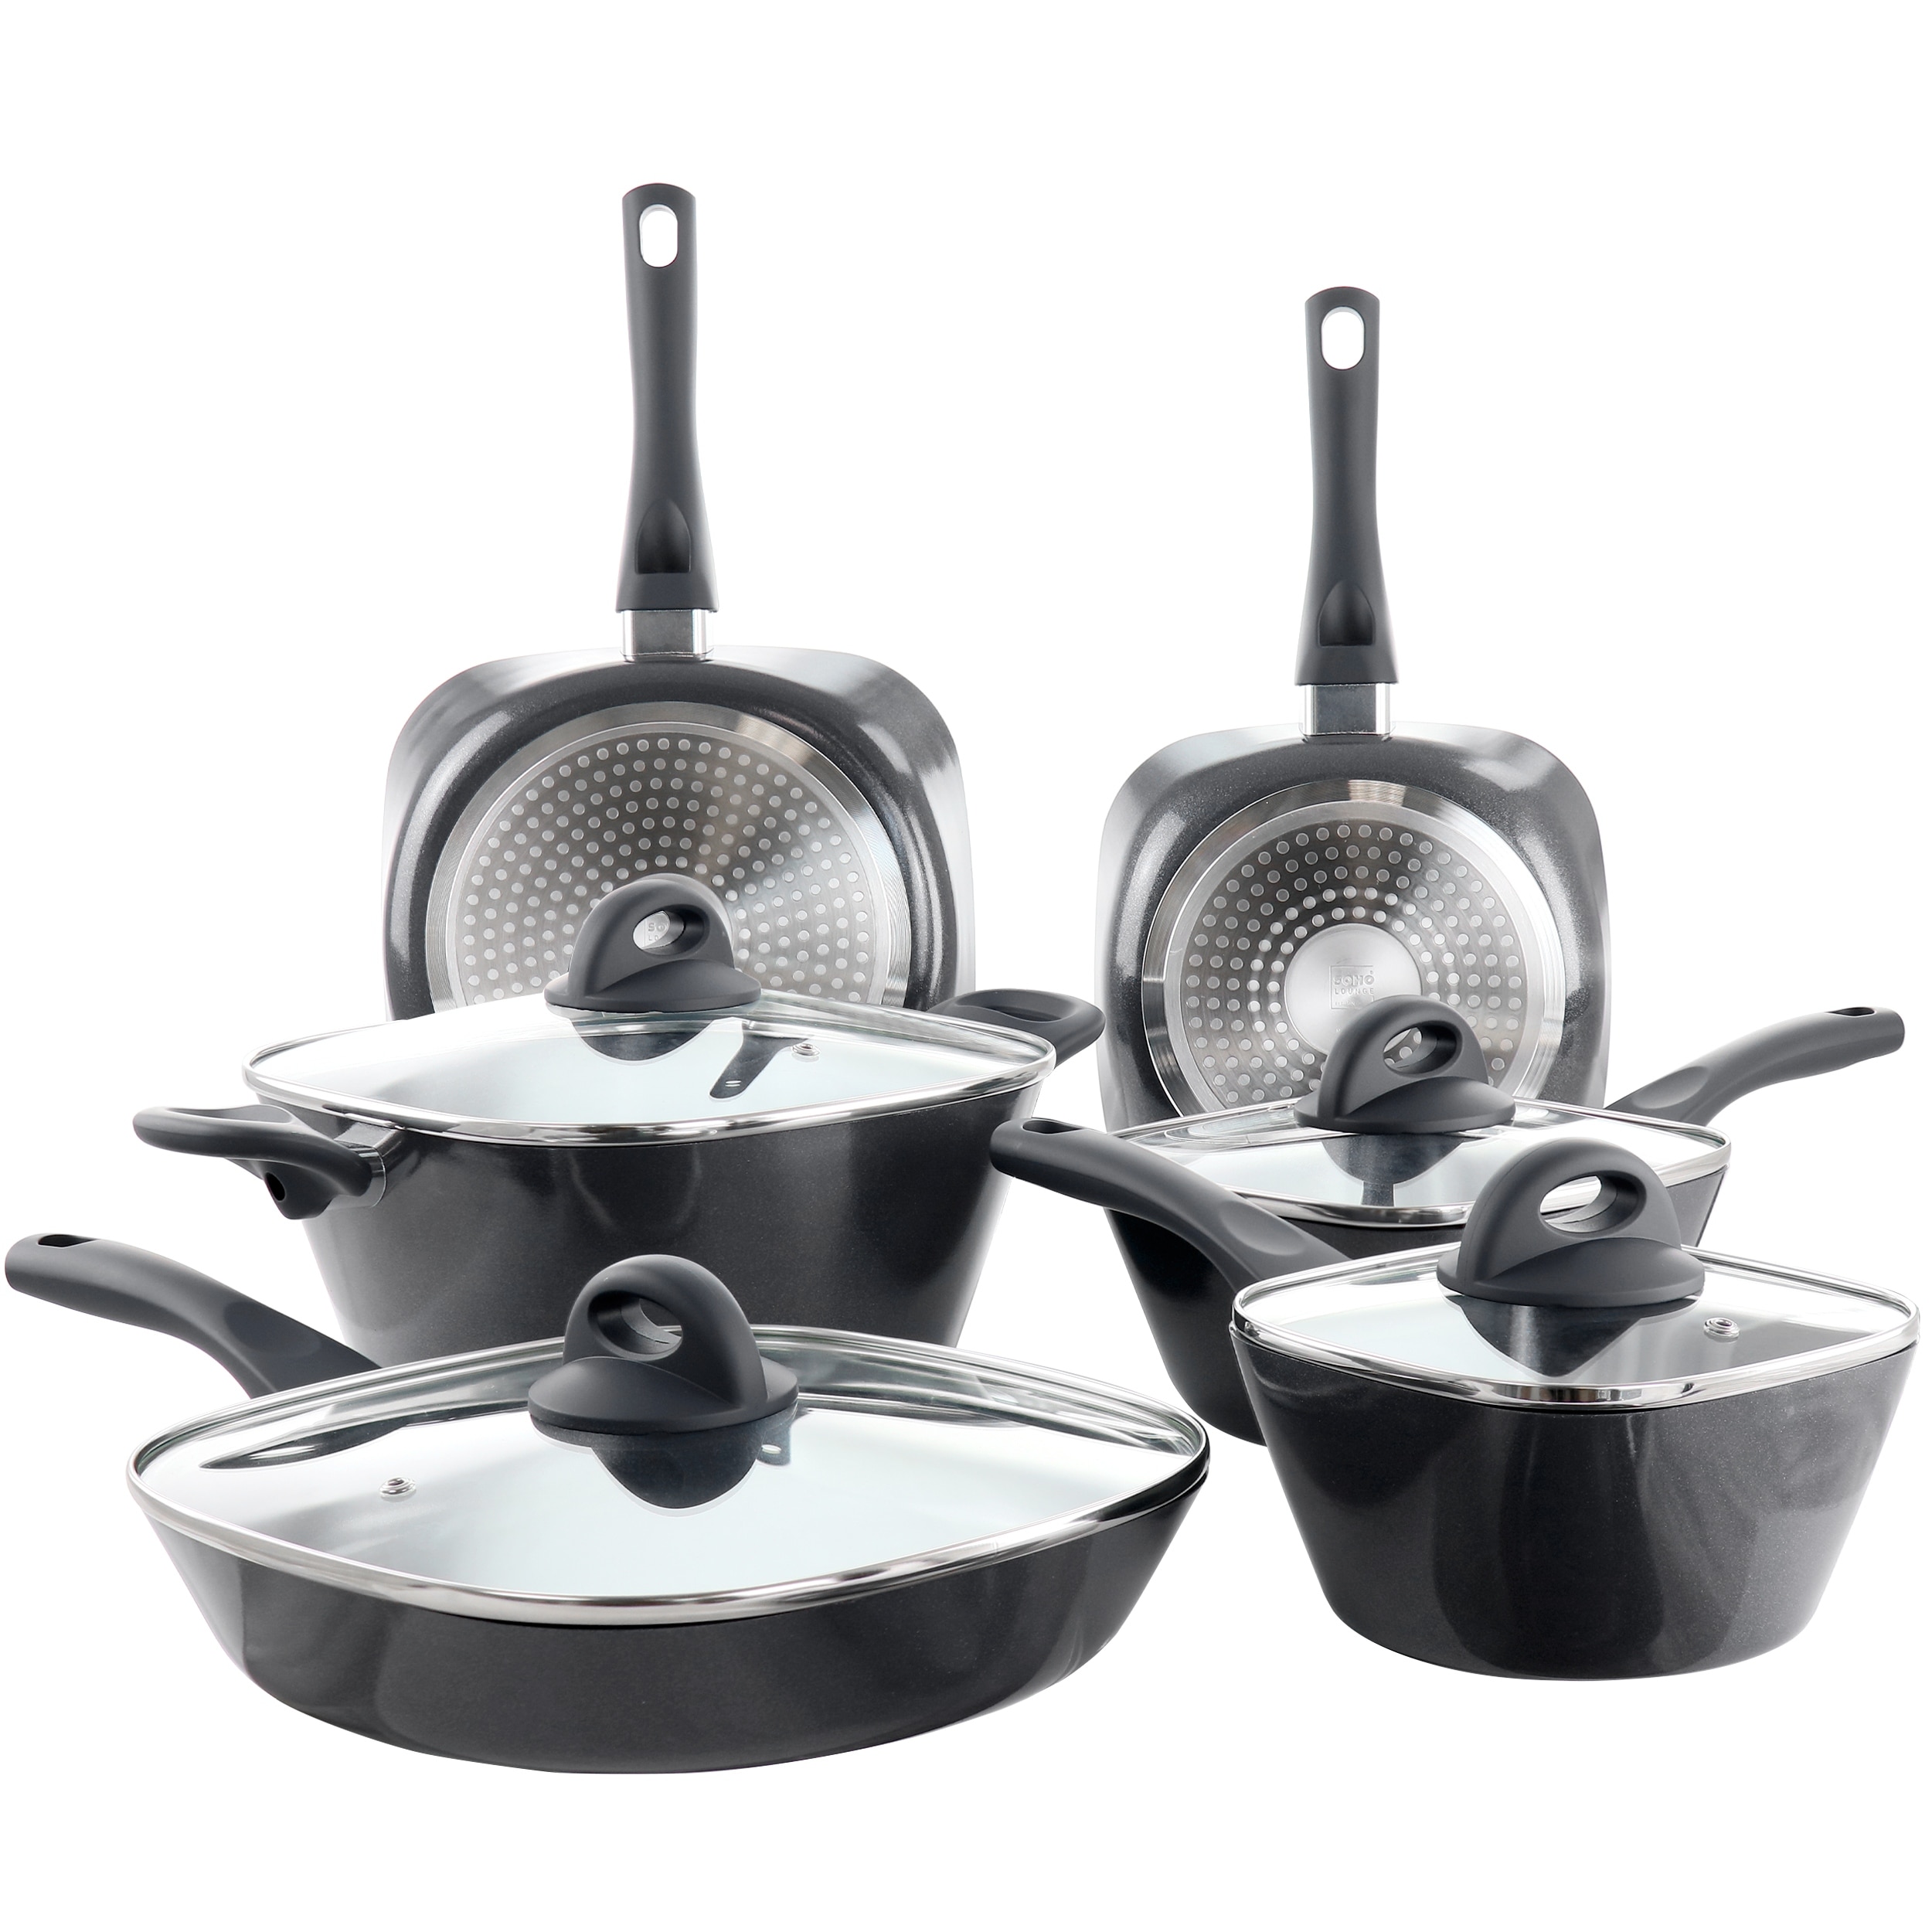 https://ak1.ostkcdn.com/images/products/is/images/direct/241db42af4d83a92955f13b81bce5800c418418f/Soho-Lounge-Diamond-10-Piece-Ceramic-Nonstick-Aluminum-Cookware-Set-in-Black.jpg